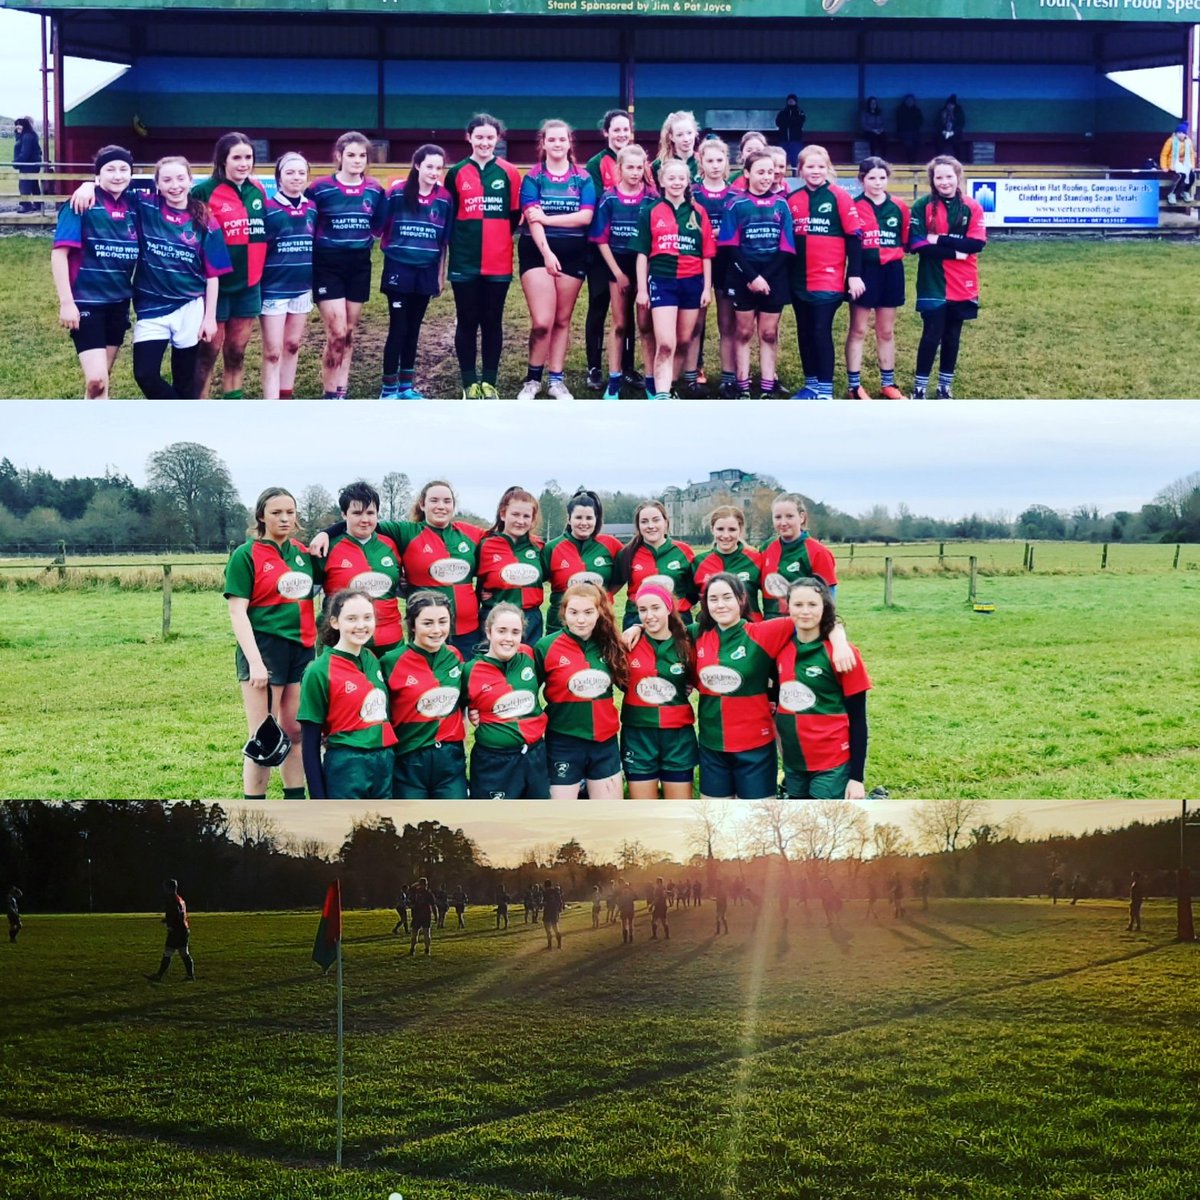 Well done to all our teams 
➡️U14 Girls Travelled to Corrib RFC girls coming away with a win ➡️U18 Girl 
V Corinthians RFC at home! A tough game, a loss but we learn and move on 
➡️ Senior Men Squad V OughterardRFC,determination and excellent team work secured an impressive win👊